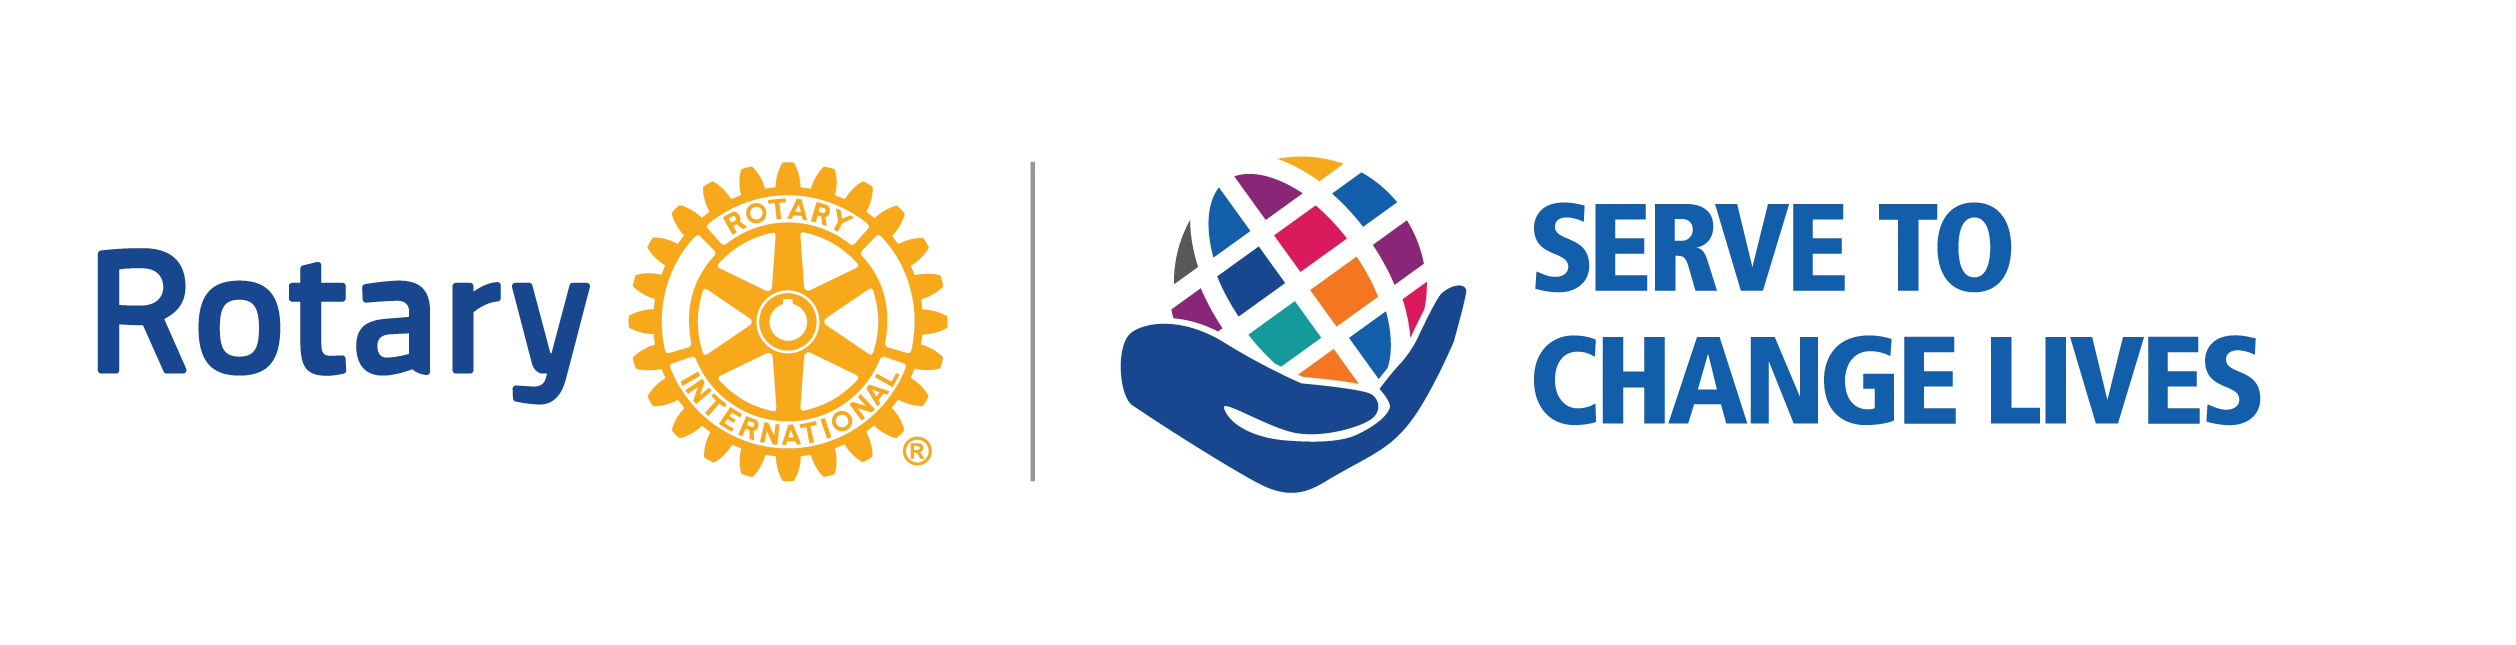 Rotary International logo with the Serve to Change Lives logo next to it.